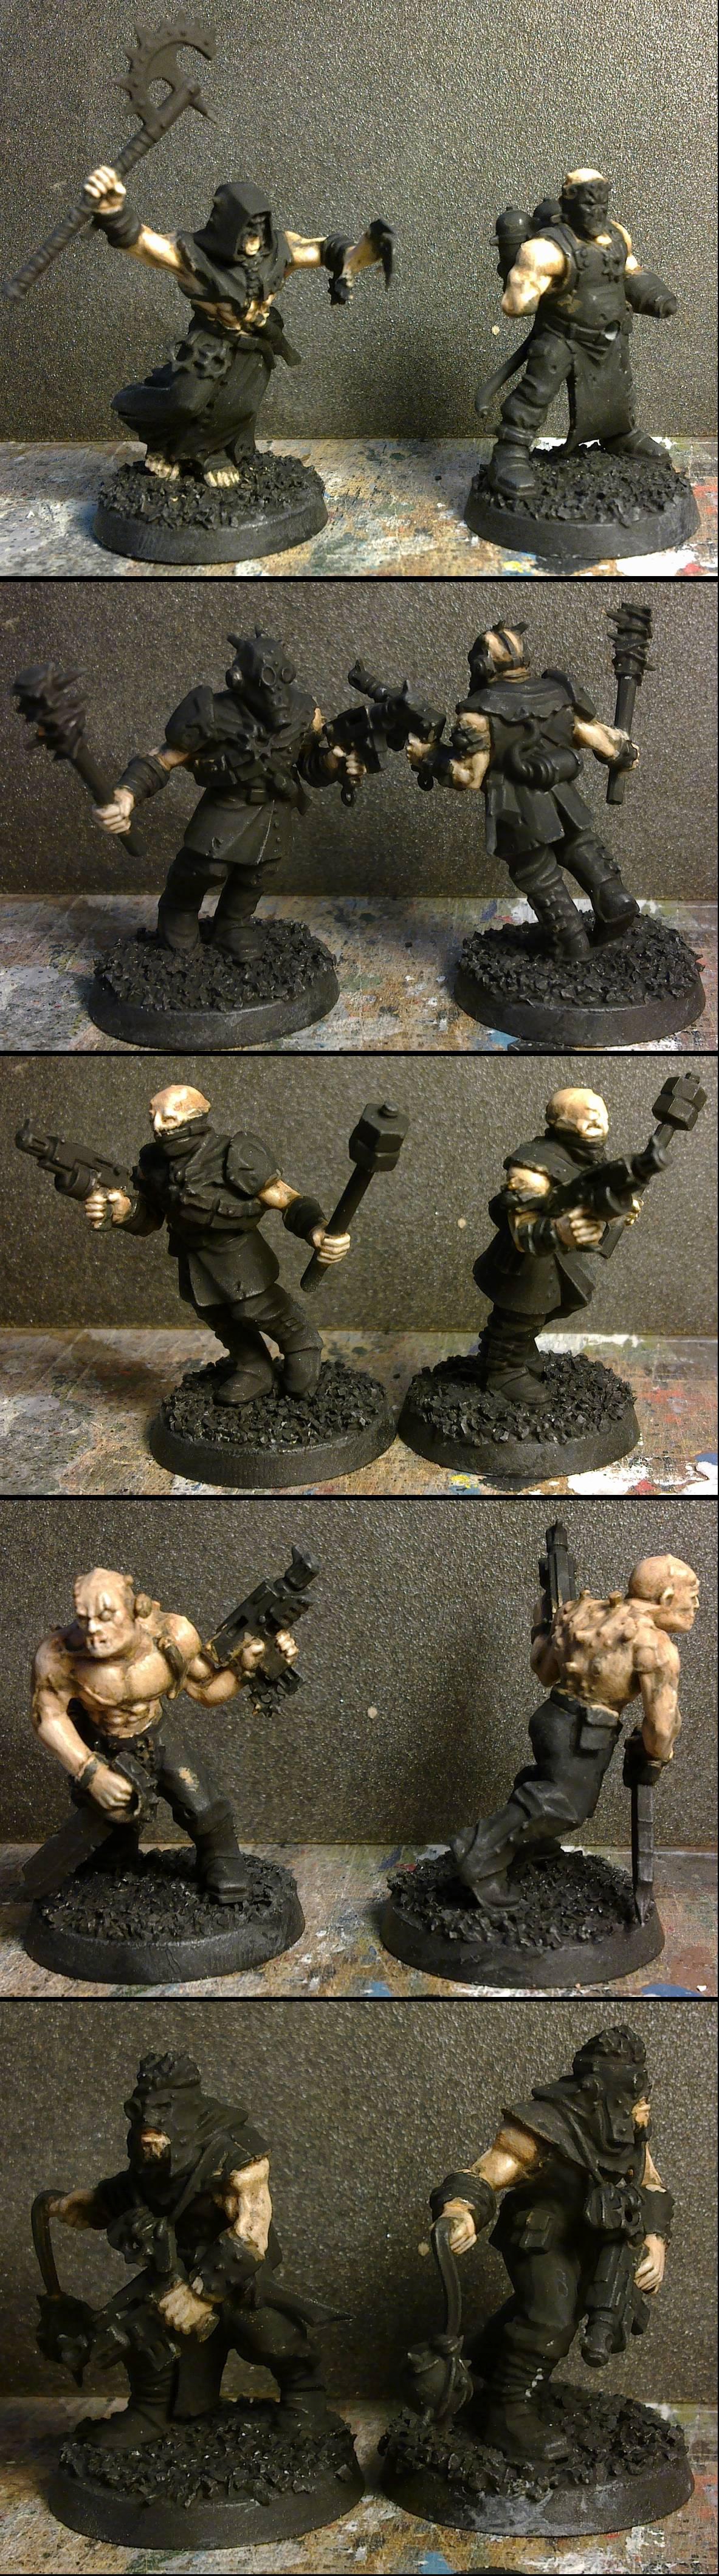 Cultists of Sect Anarkus wip 1